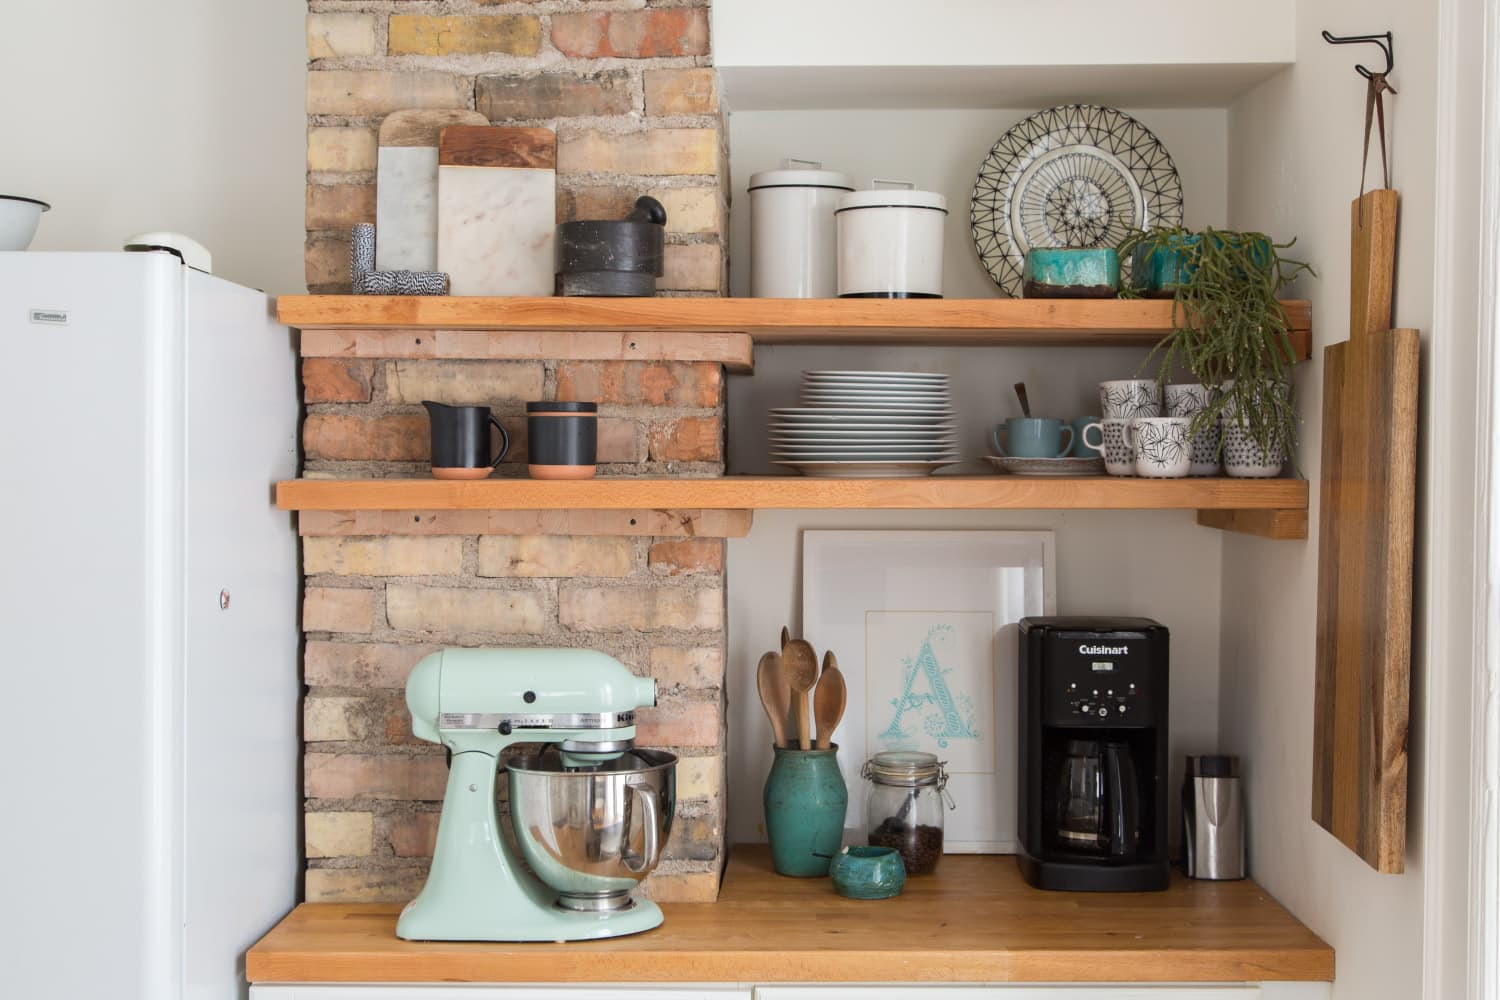 Small Kitchen Appliance Storage
 10 Snazzy Ways to Organize and Store Small Appliances